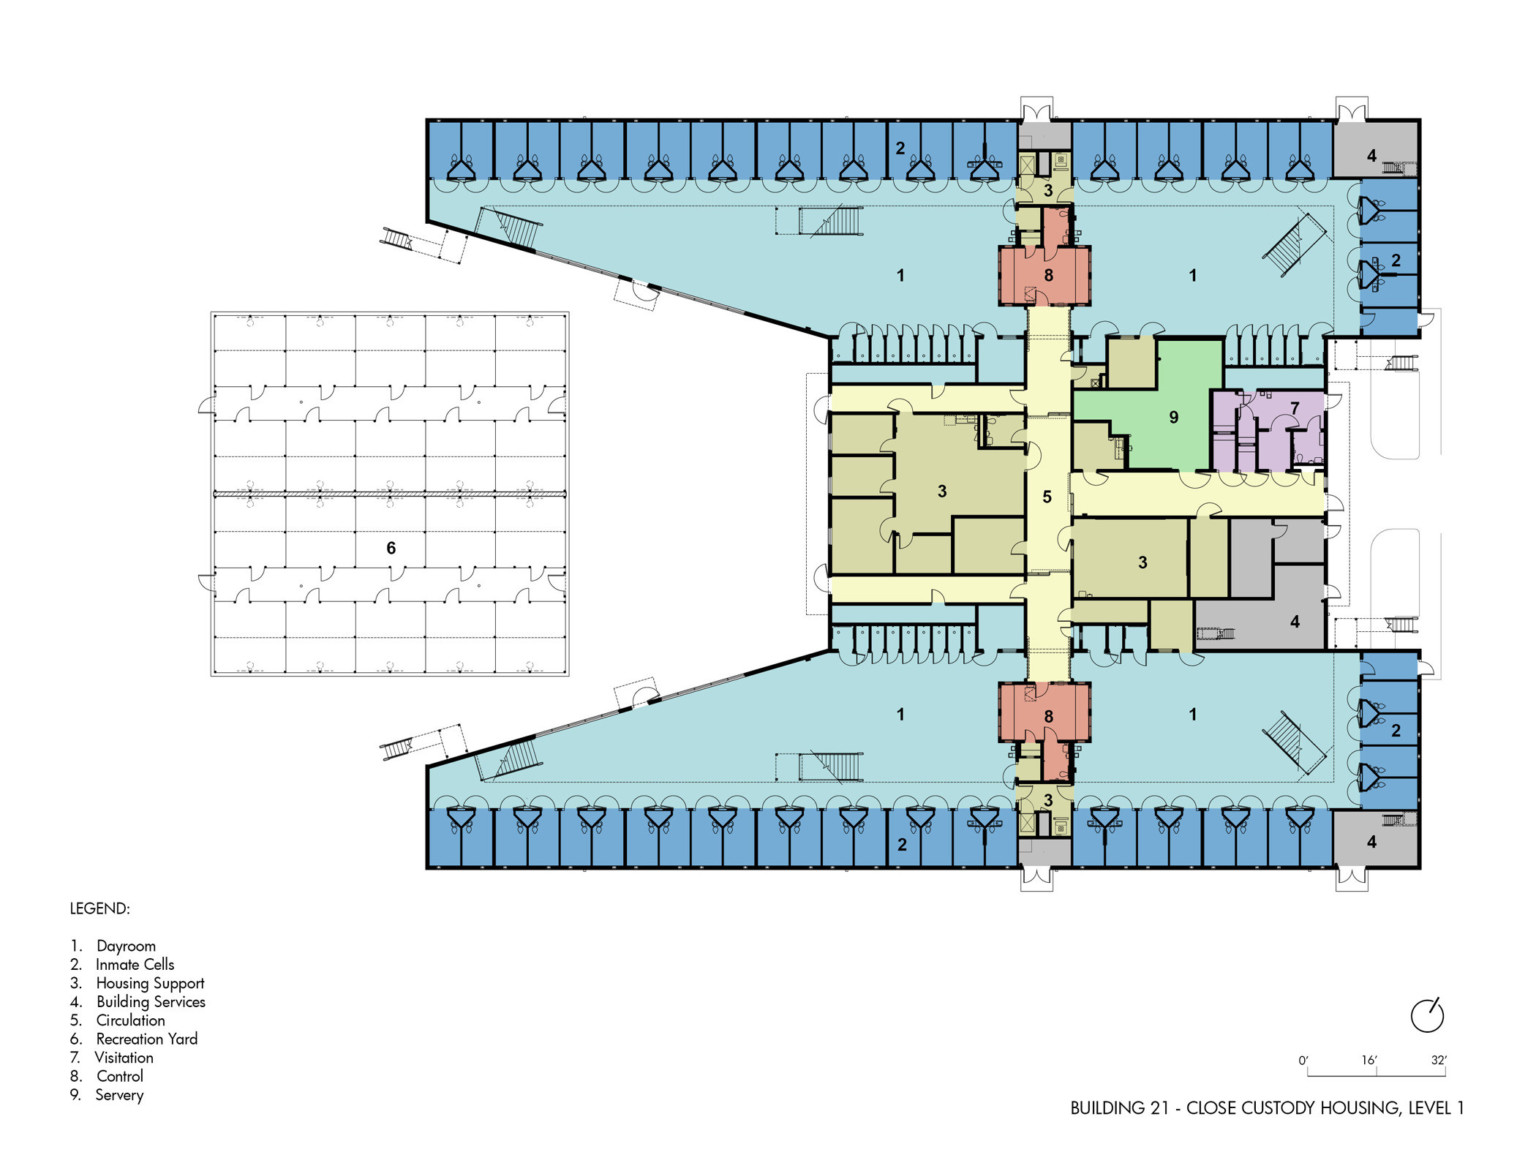 Floorplan labeled Building 21 - Close Custody Housing Level 1. Sections numbered with legend at lower left and scale to right